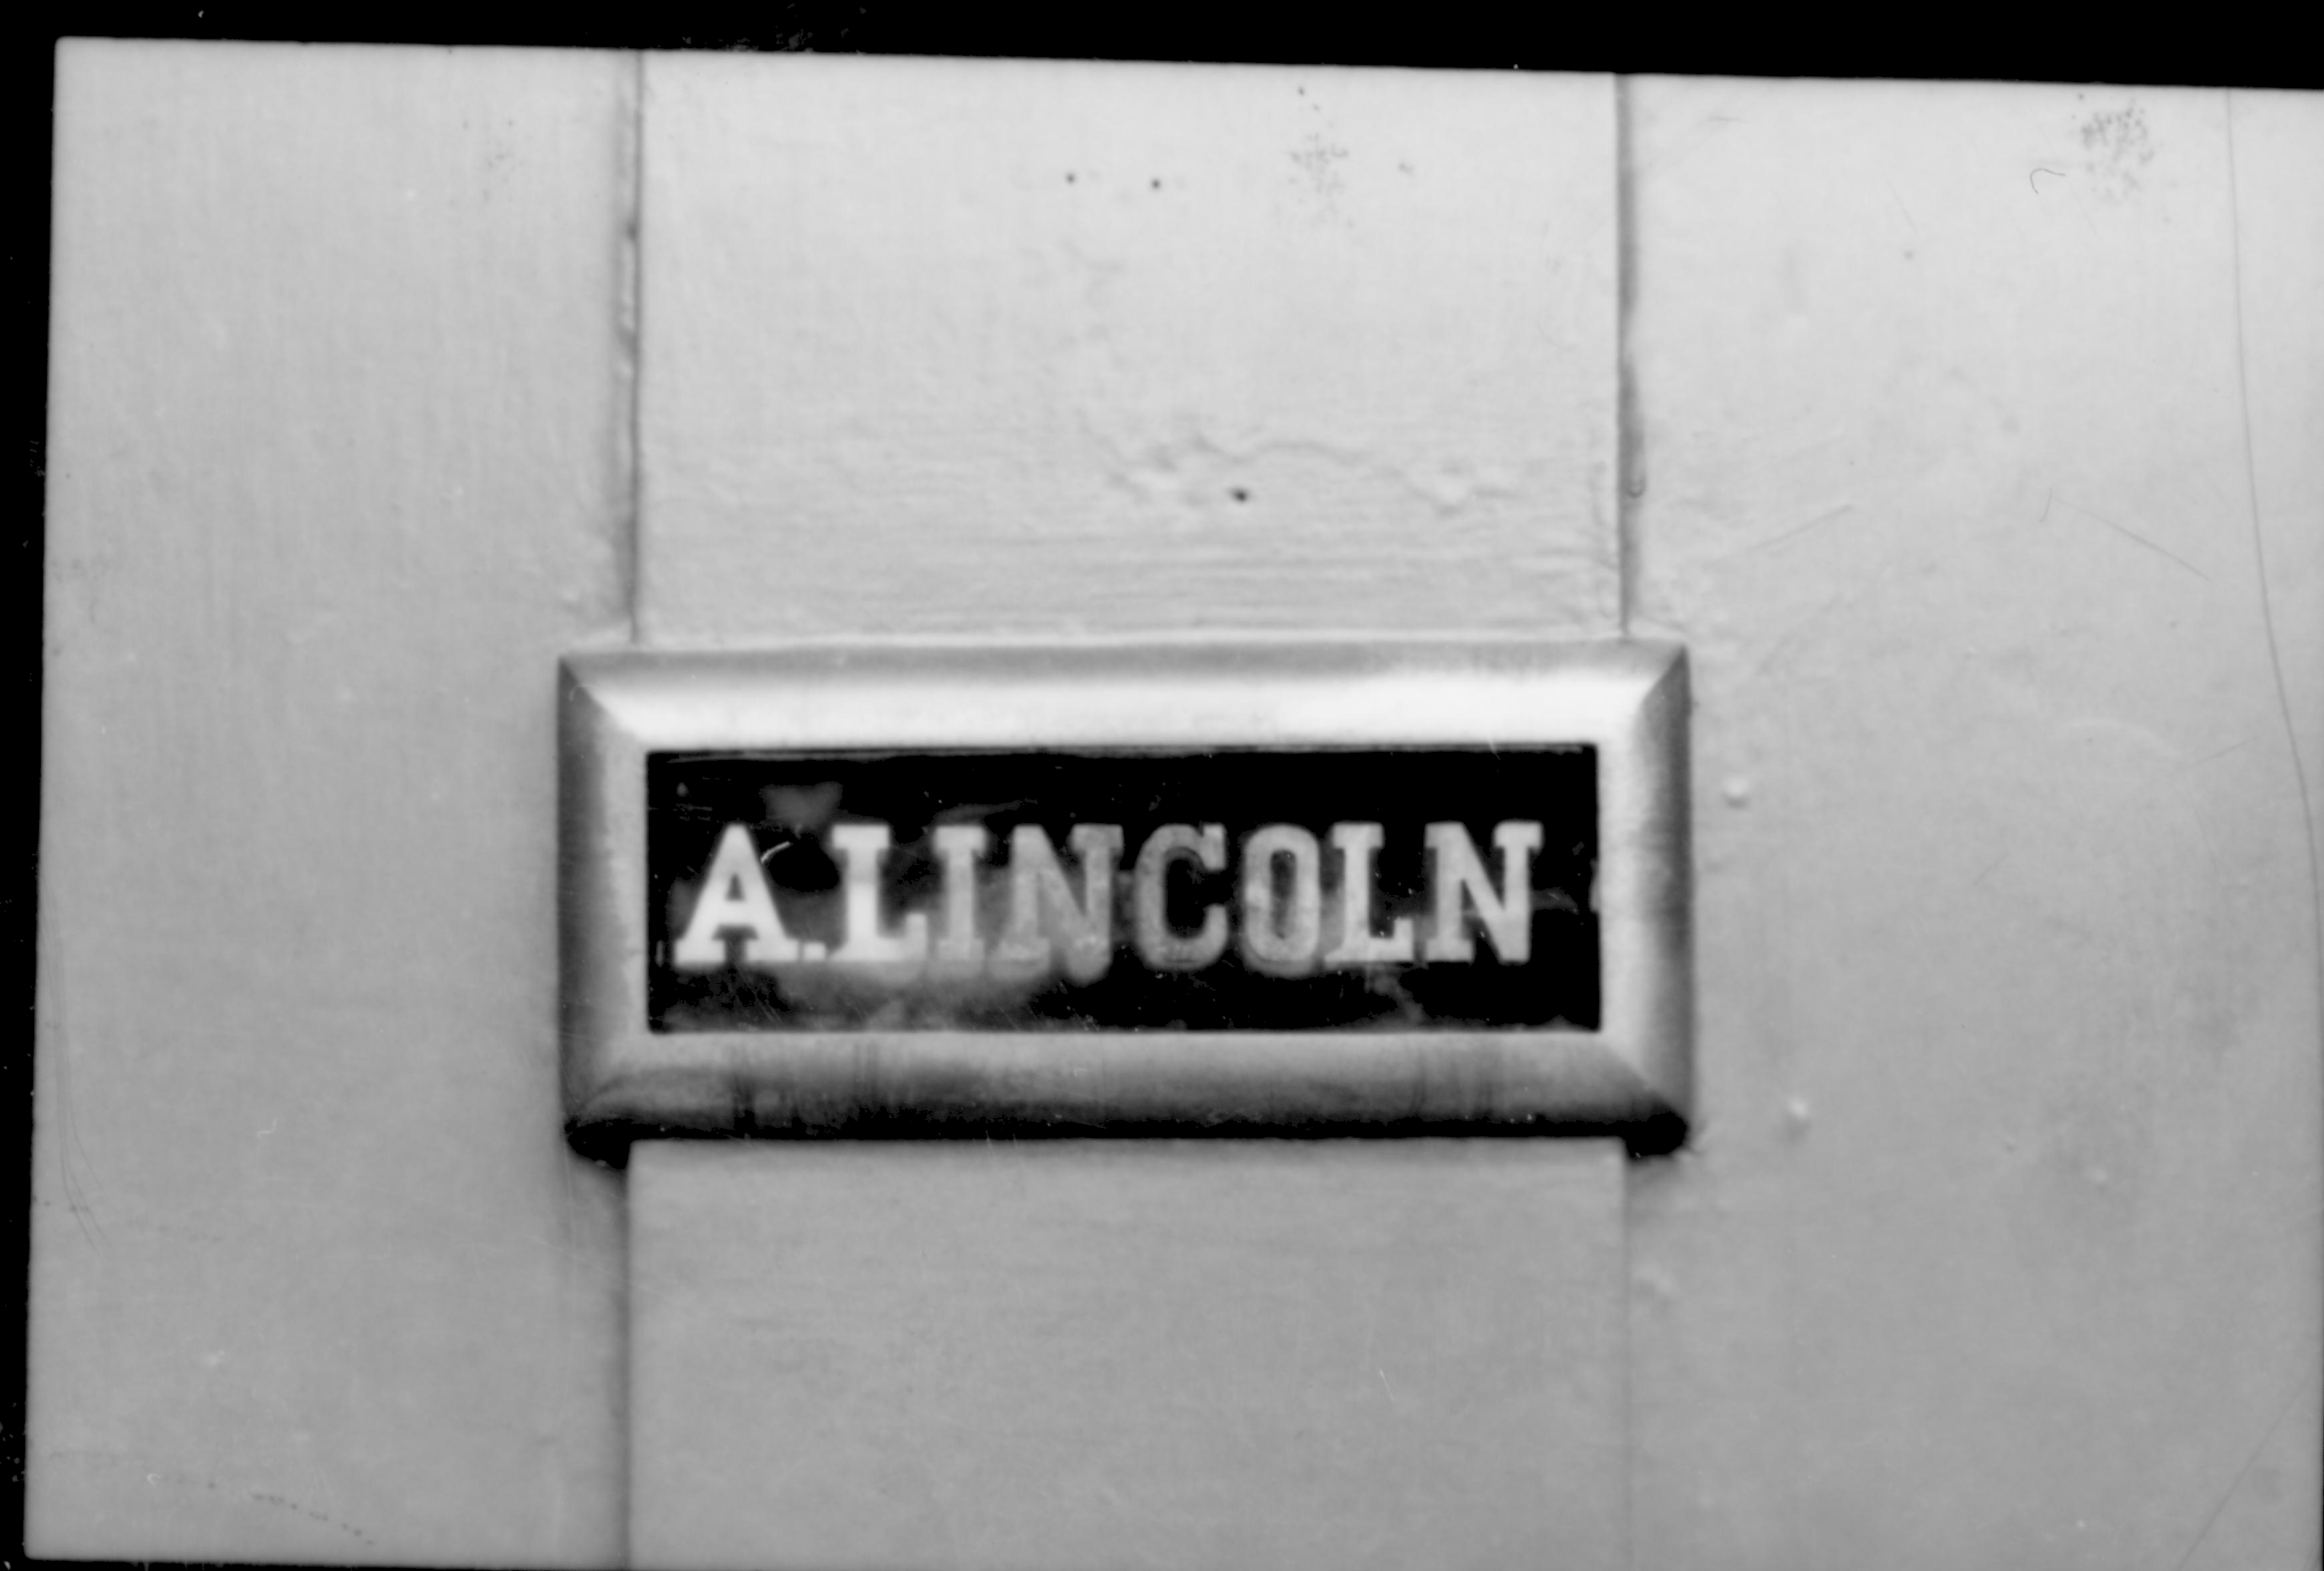 NA Lincoln, Home, Restoration, Front Door, Name Plate